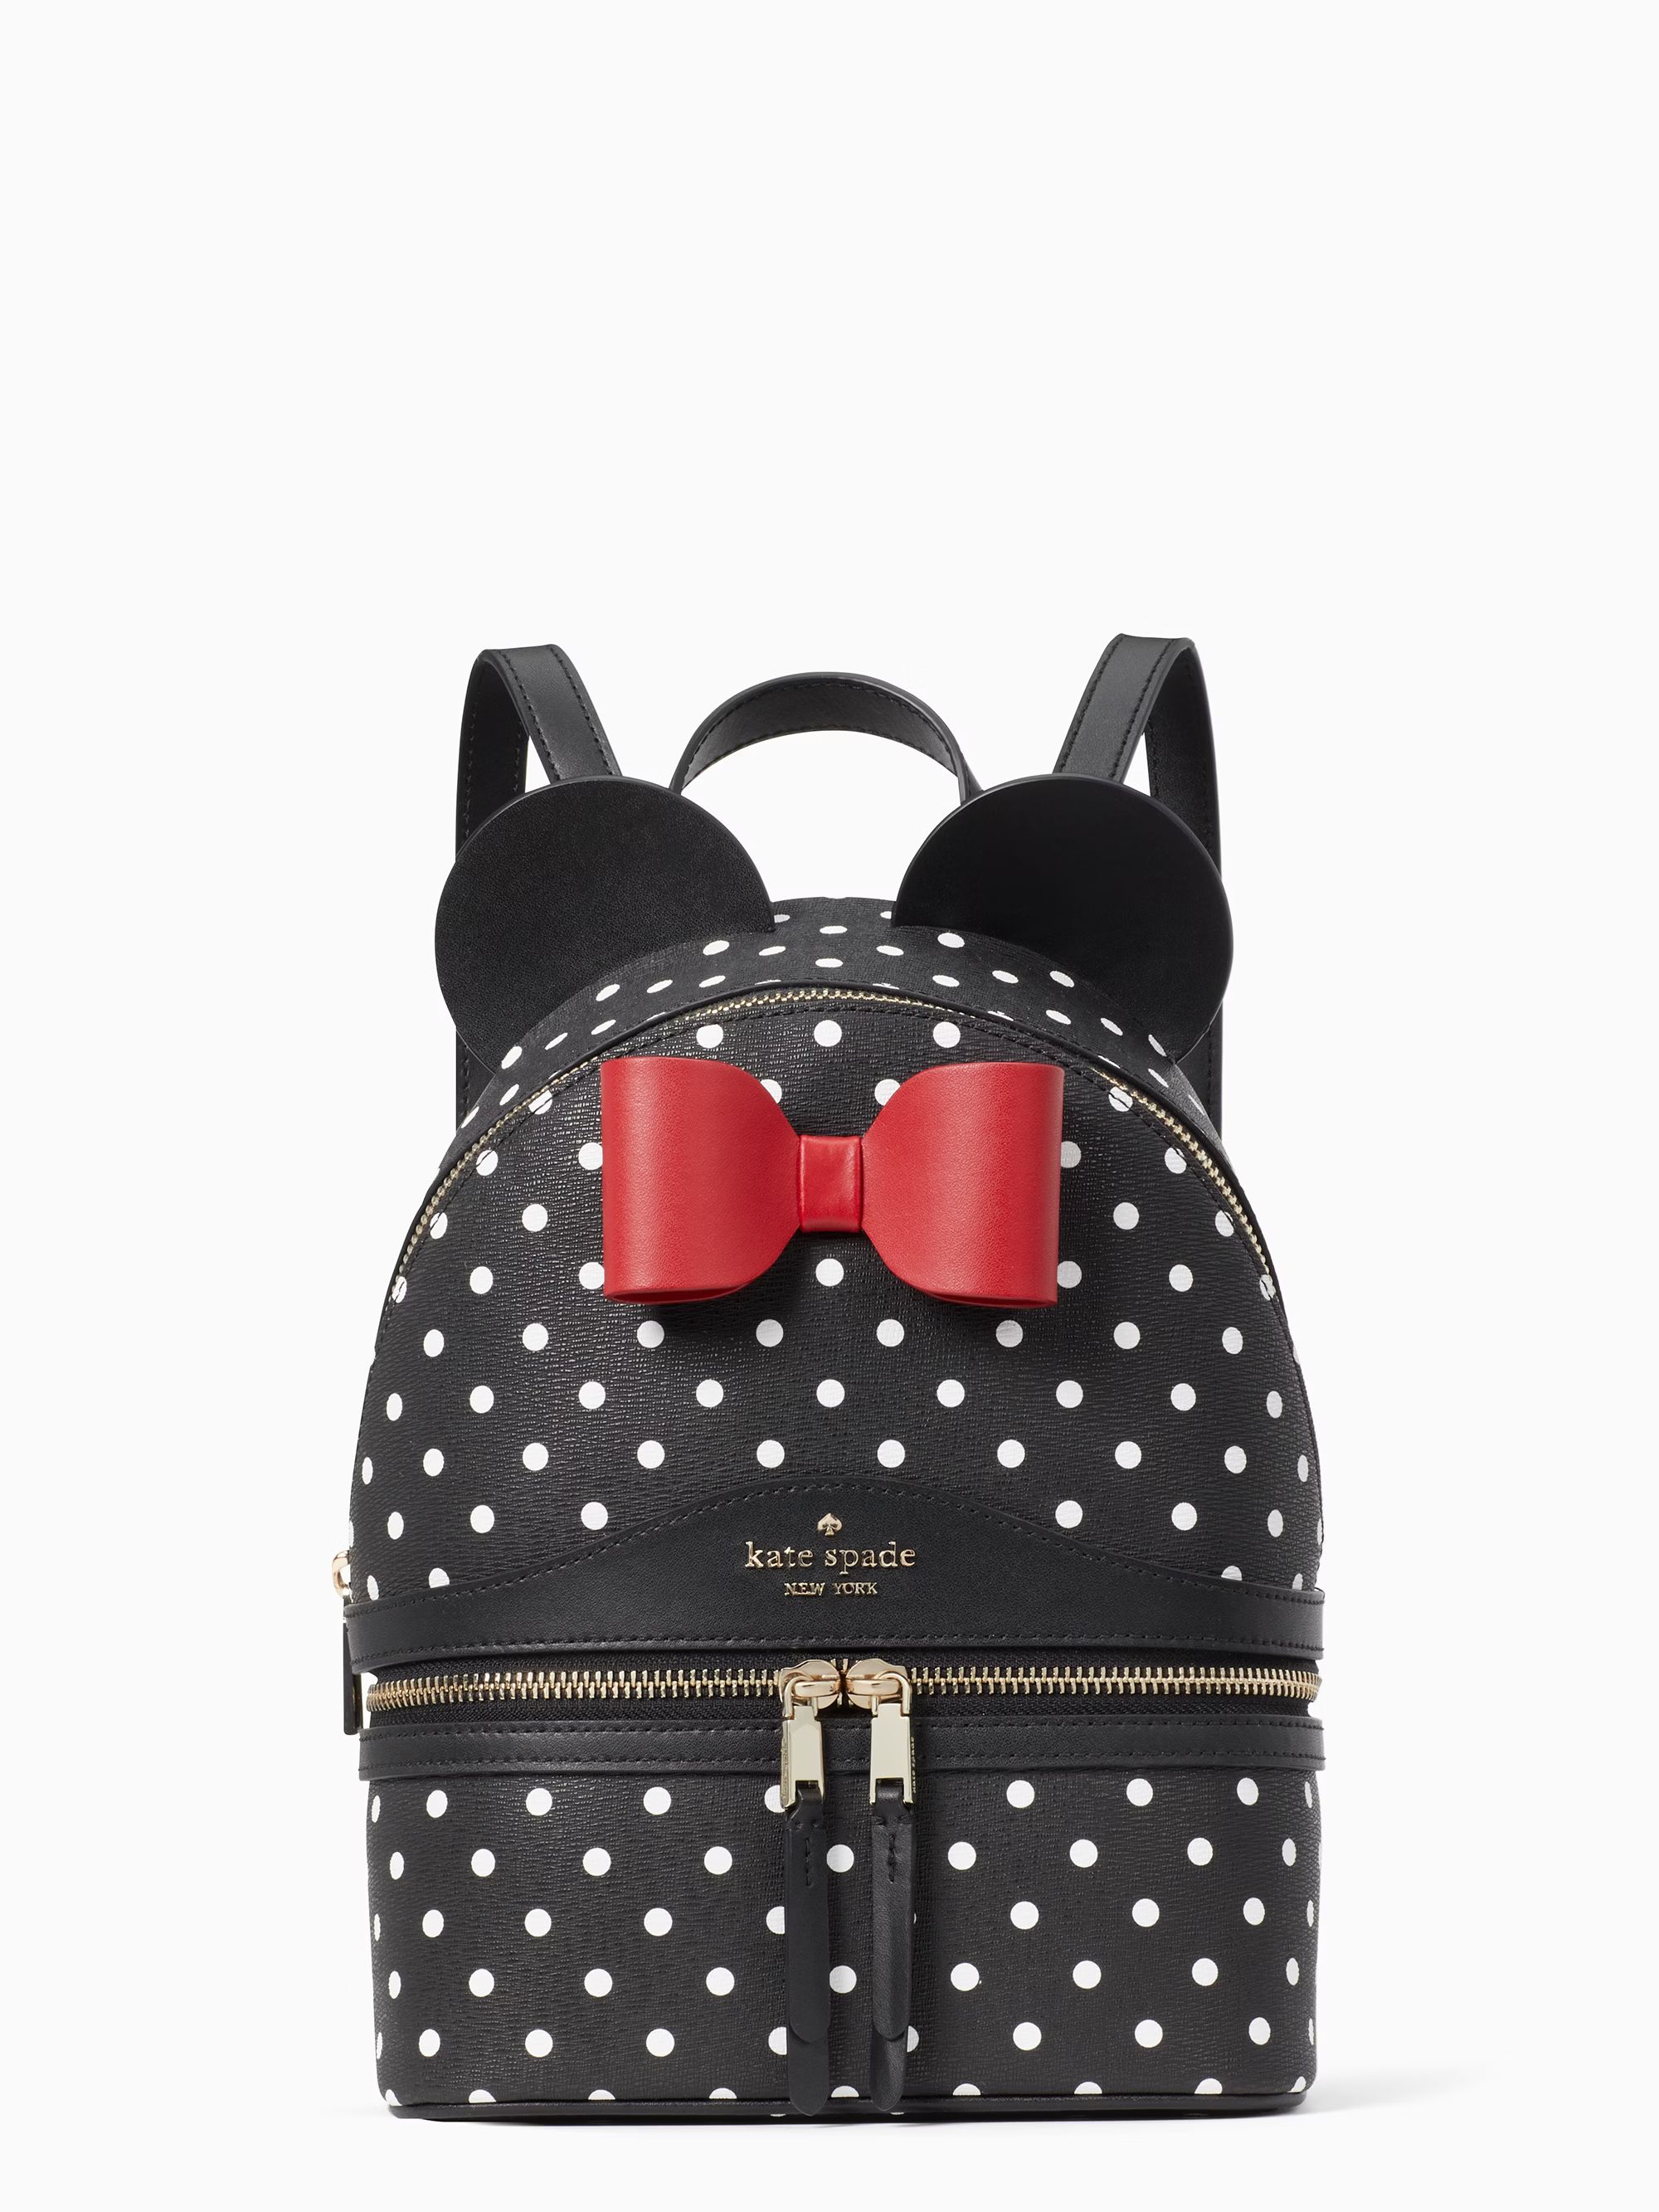 disney x kate spade new york minnie dome backpack | Kate Spade Outlet